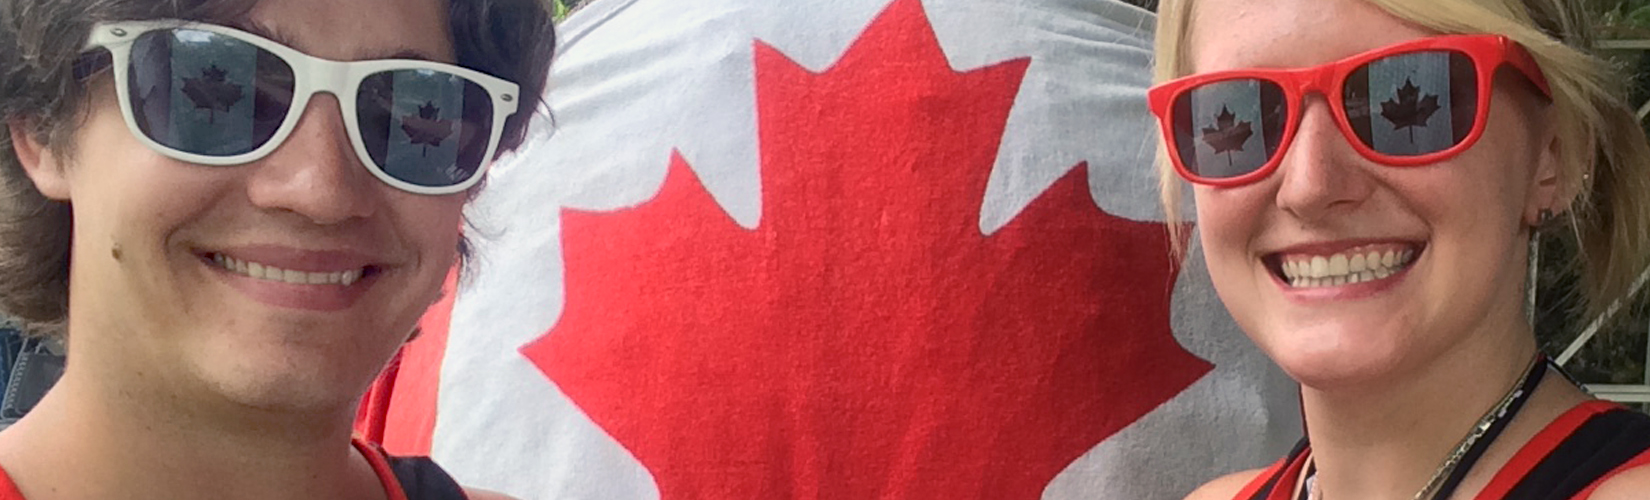 I've Been Bit! A Travel Blog :: What Does Canada Mean to You?